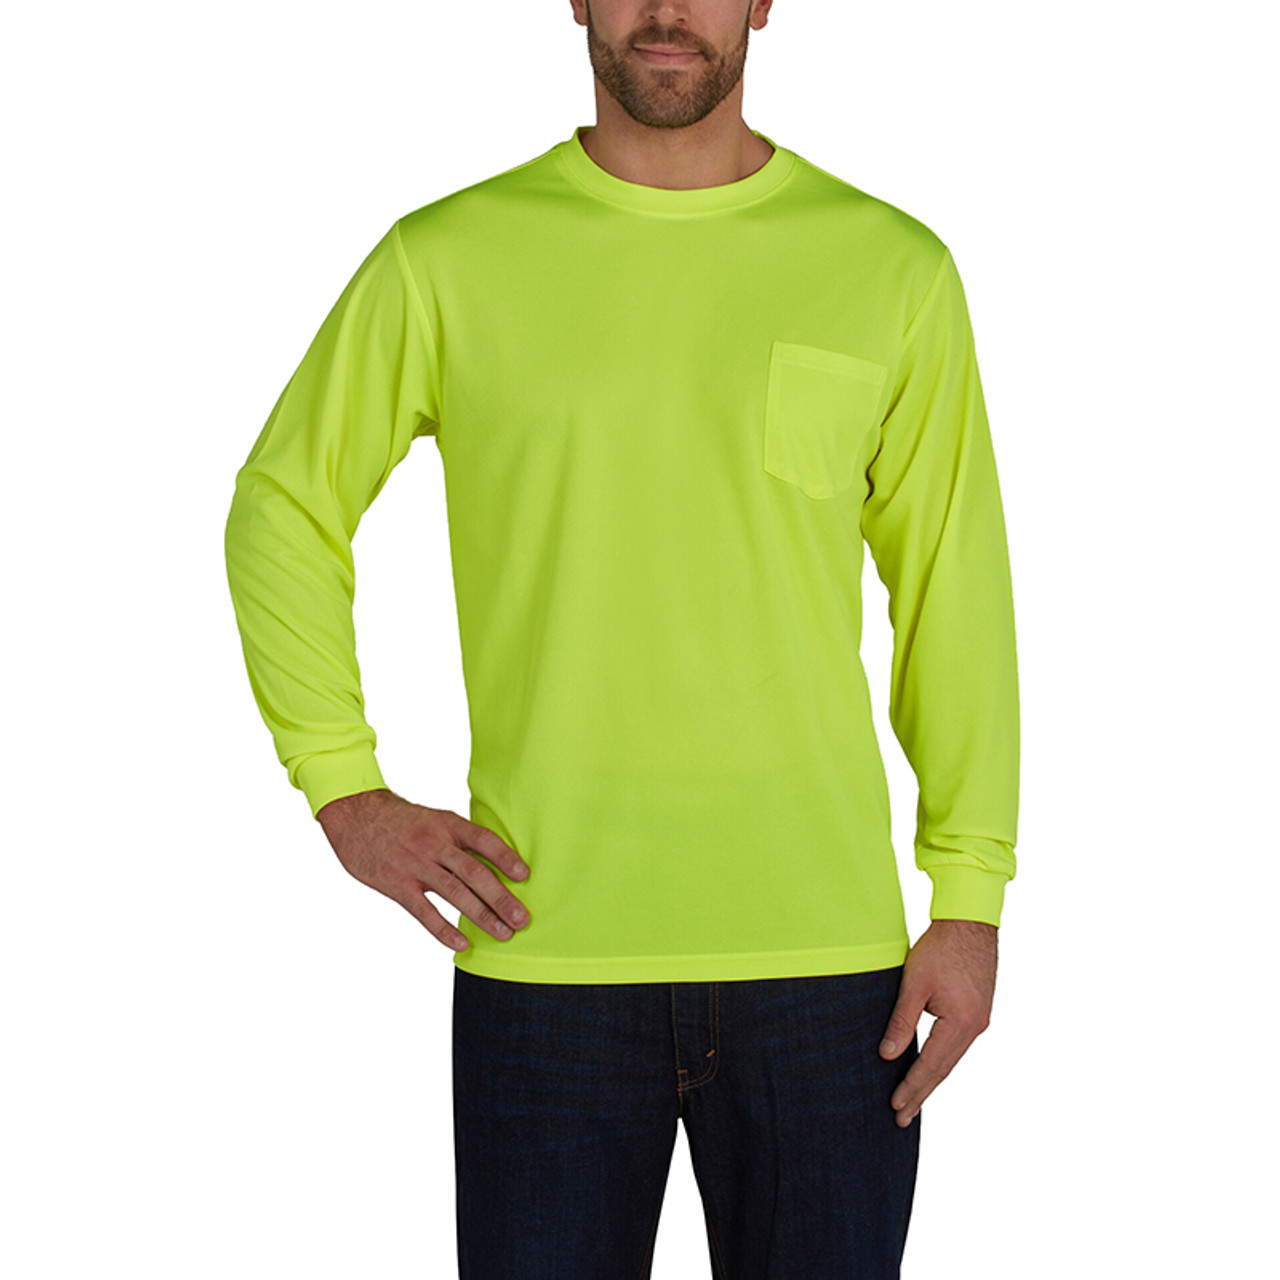 Utility Pro Non-ANSI Birdseye Knit LS Shirt with Perimeter Insect Guard ...